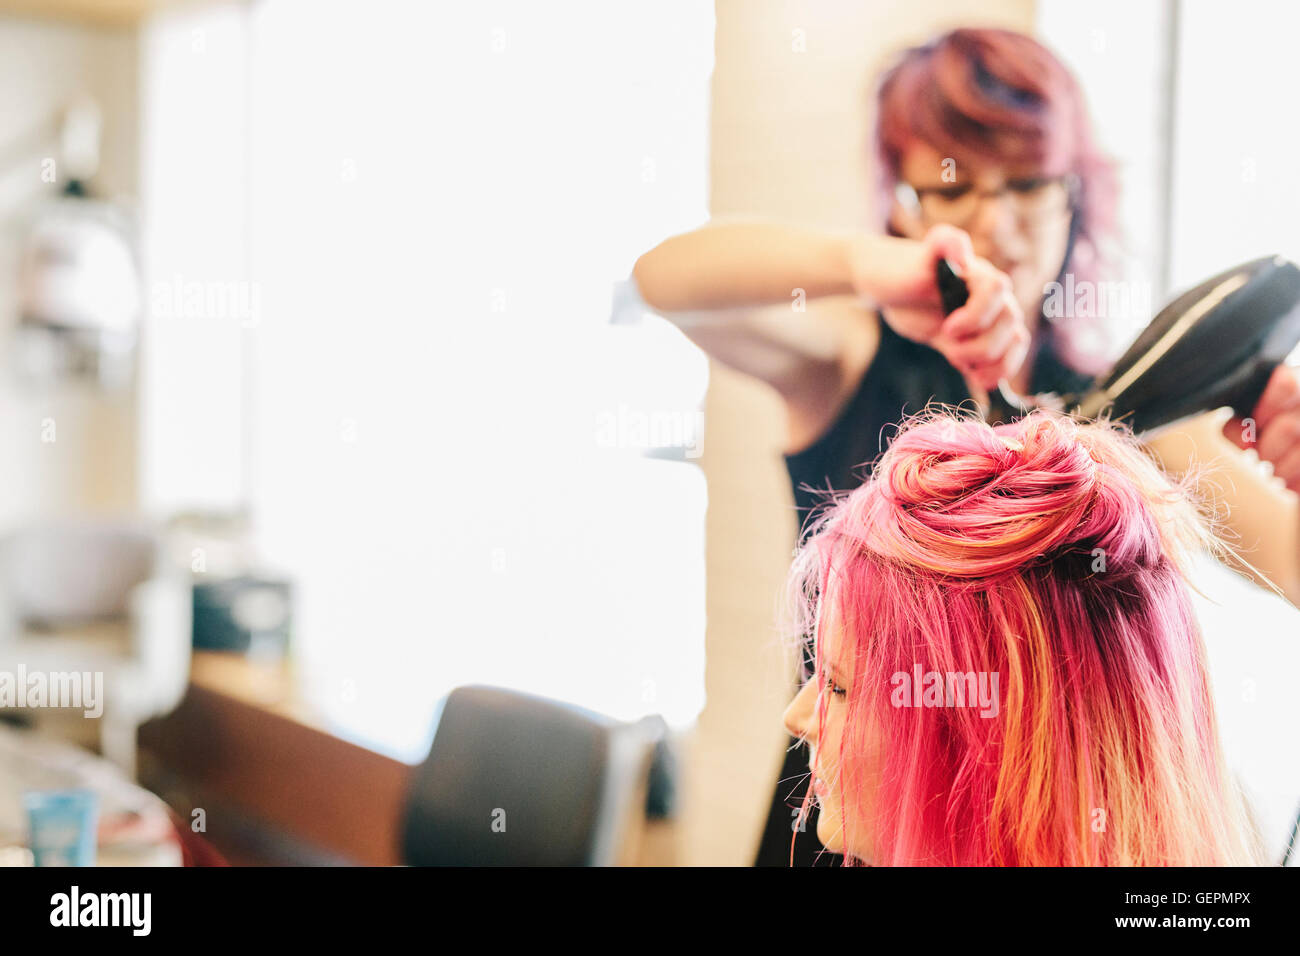 A hair stylist blow-drying a client's long pink dyed hair. Stock Photo